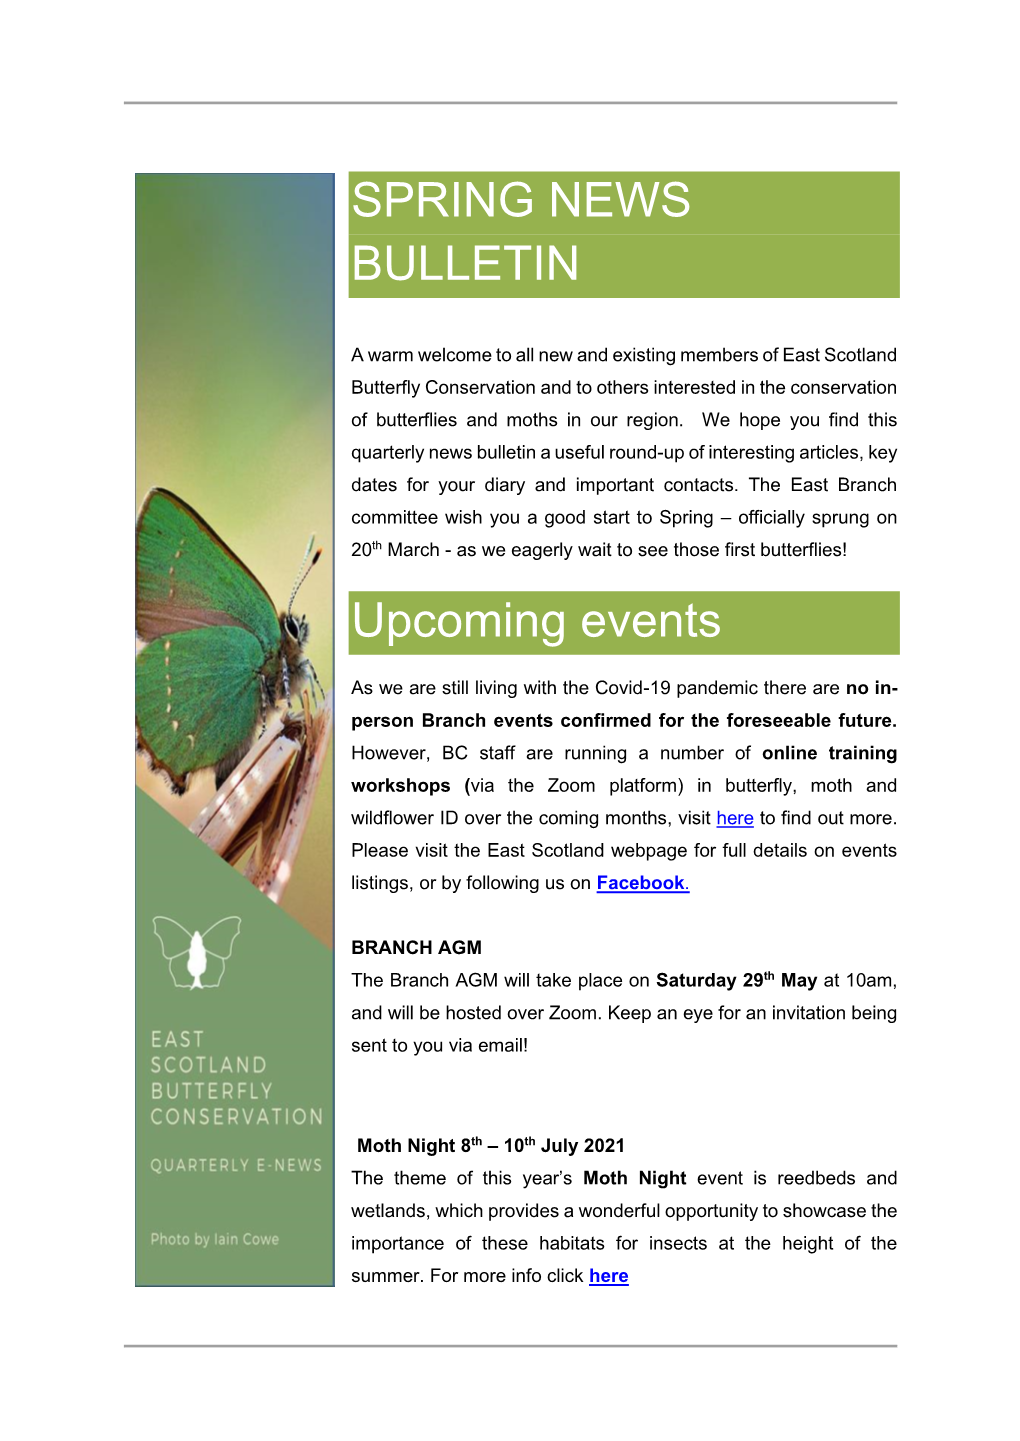 SPRING NEWS BULLETIN Upcoming Events